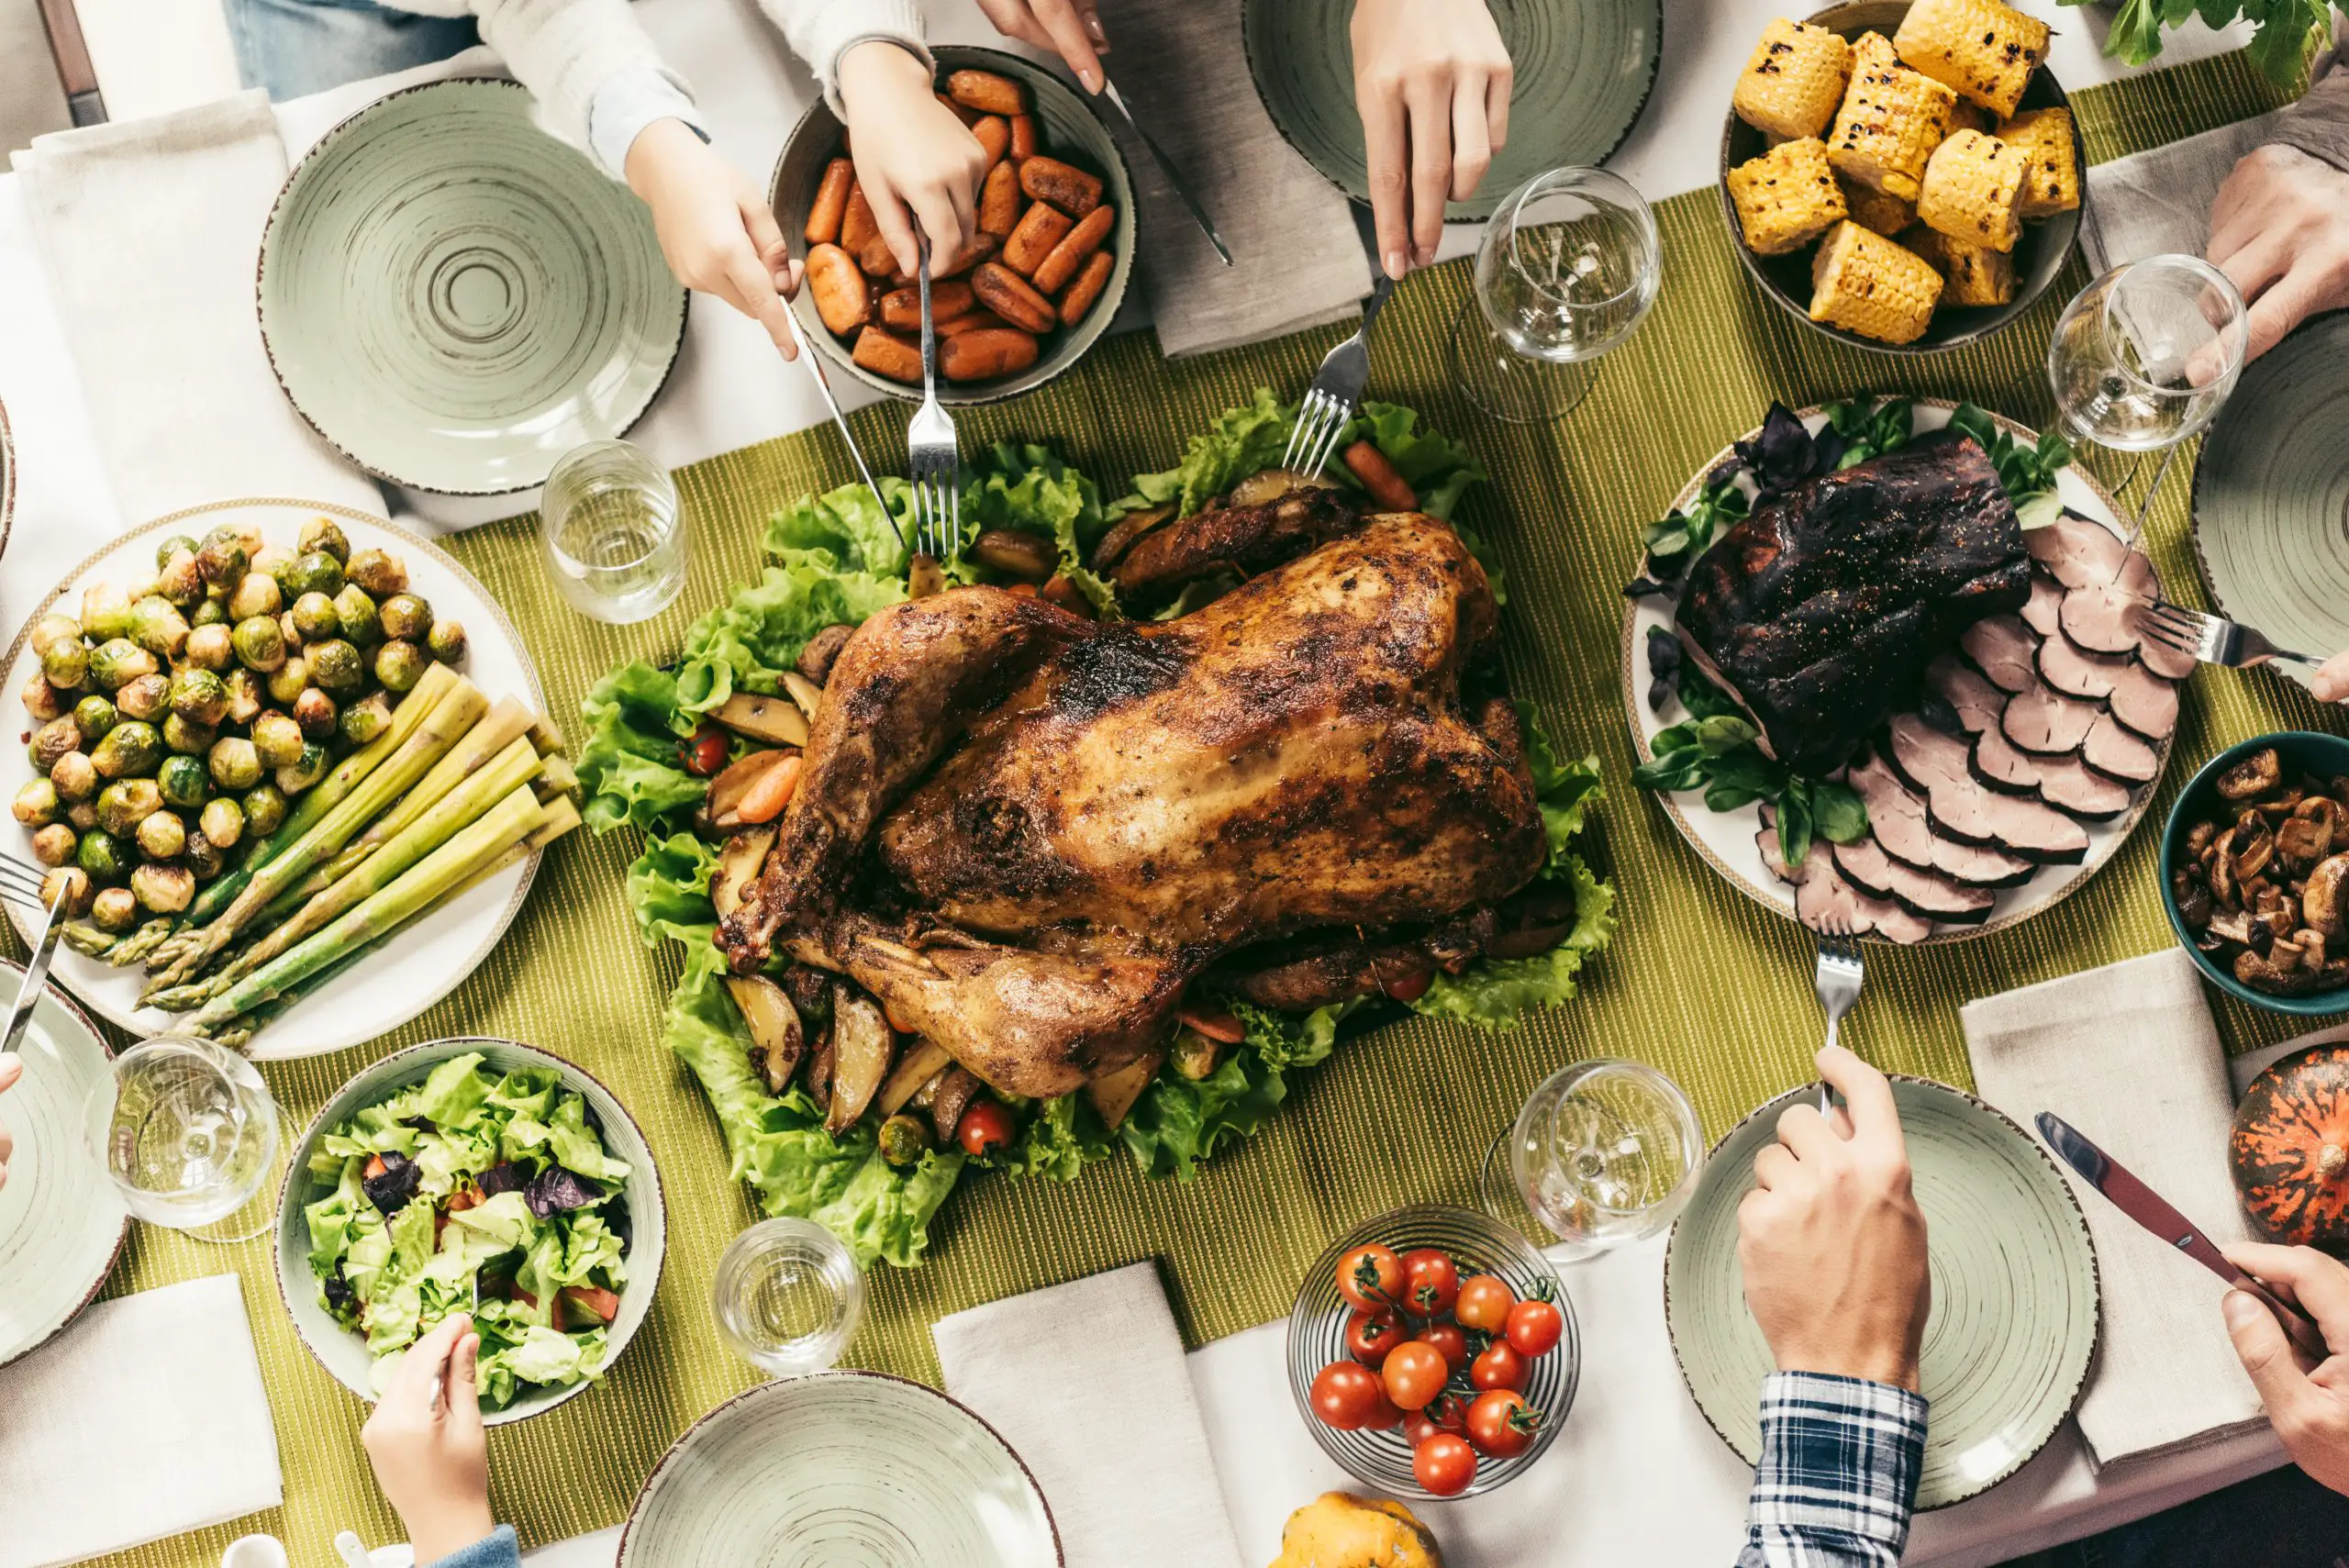 a thanksgiving dinner spread, photo taken from above the table. There is a whole turker, a platter of meat, corn on the cob, green salad, and aspragus and brussels sprouts. People sitting off to the side are reaching in with forks.